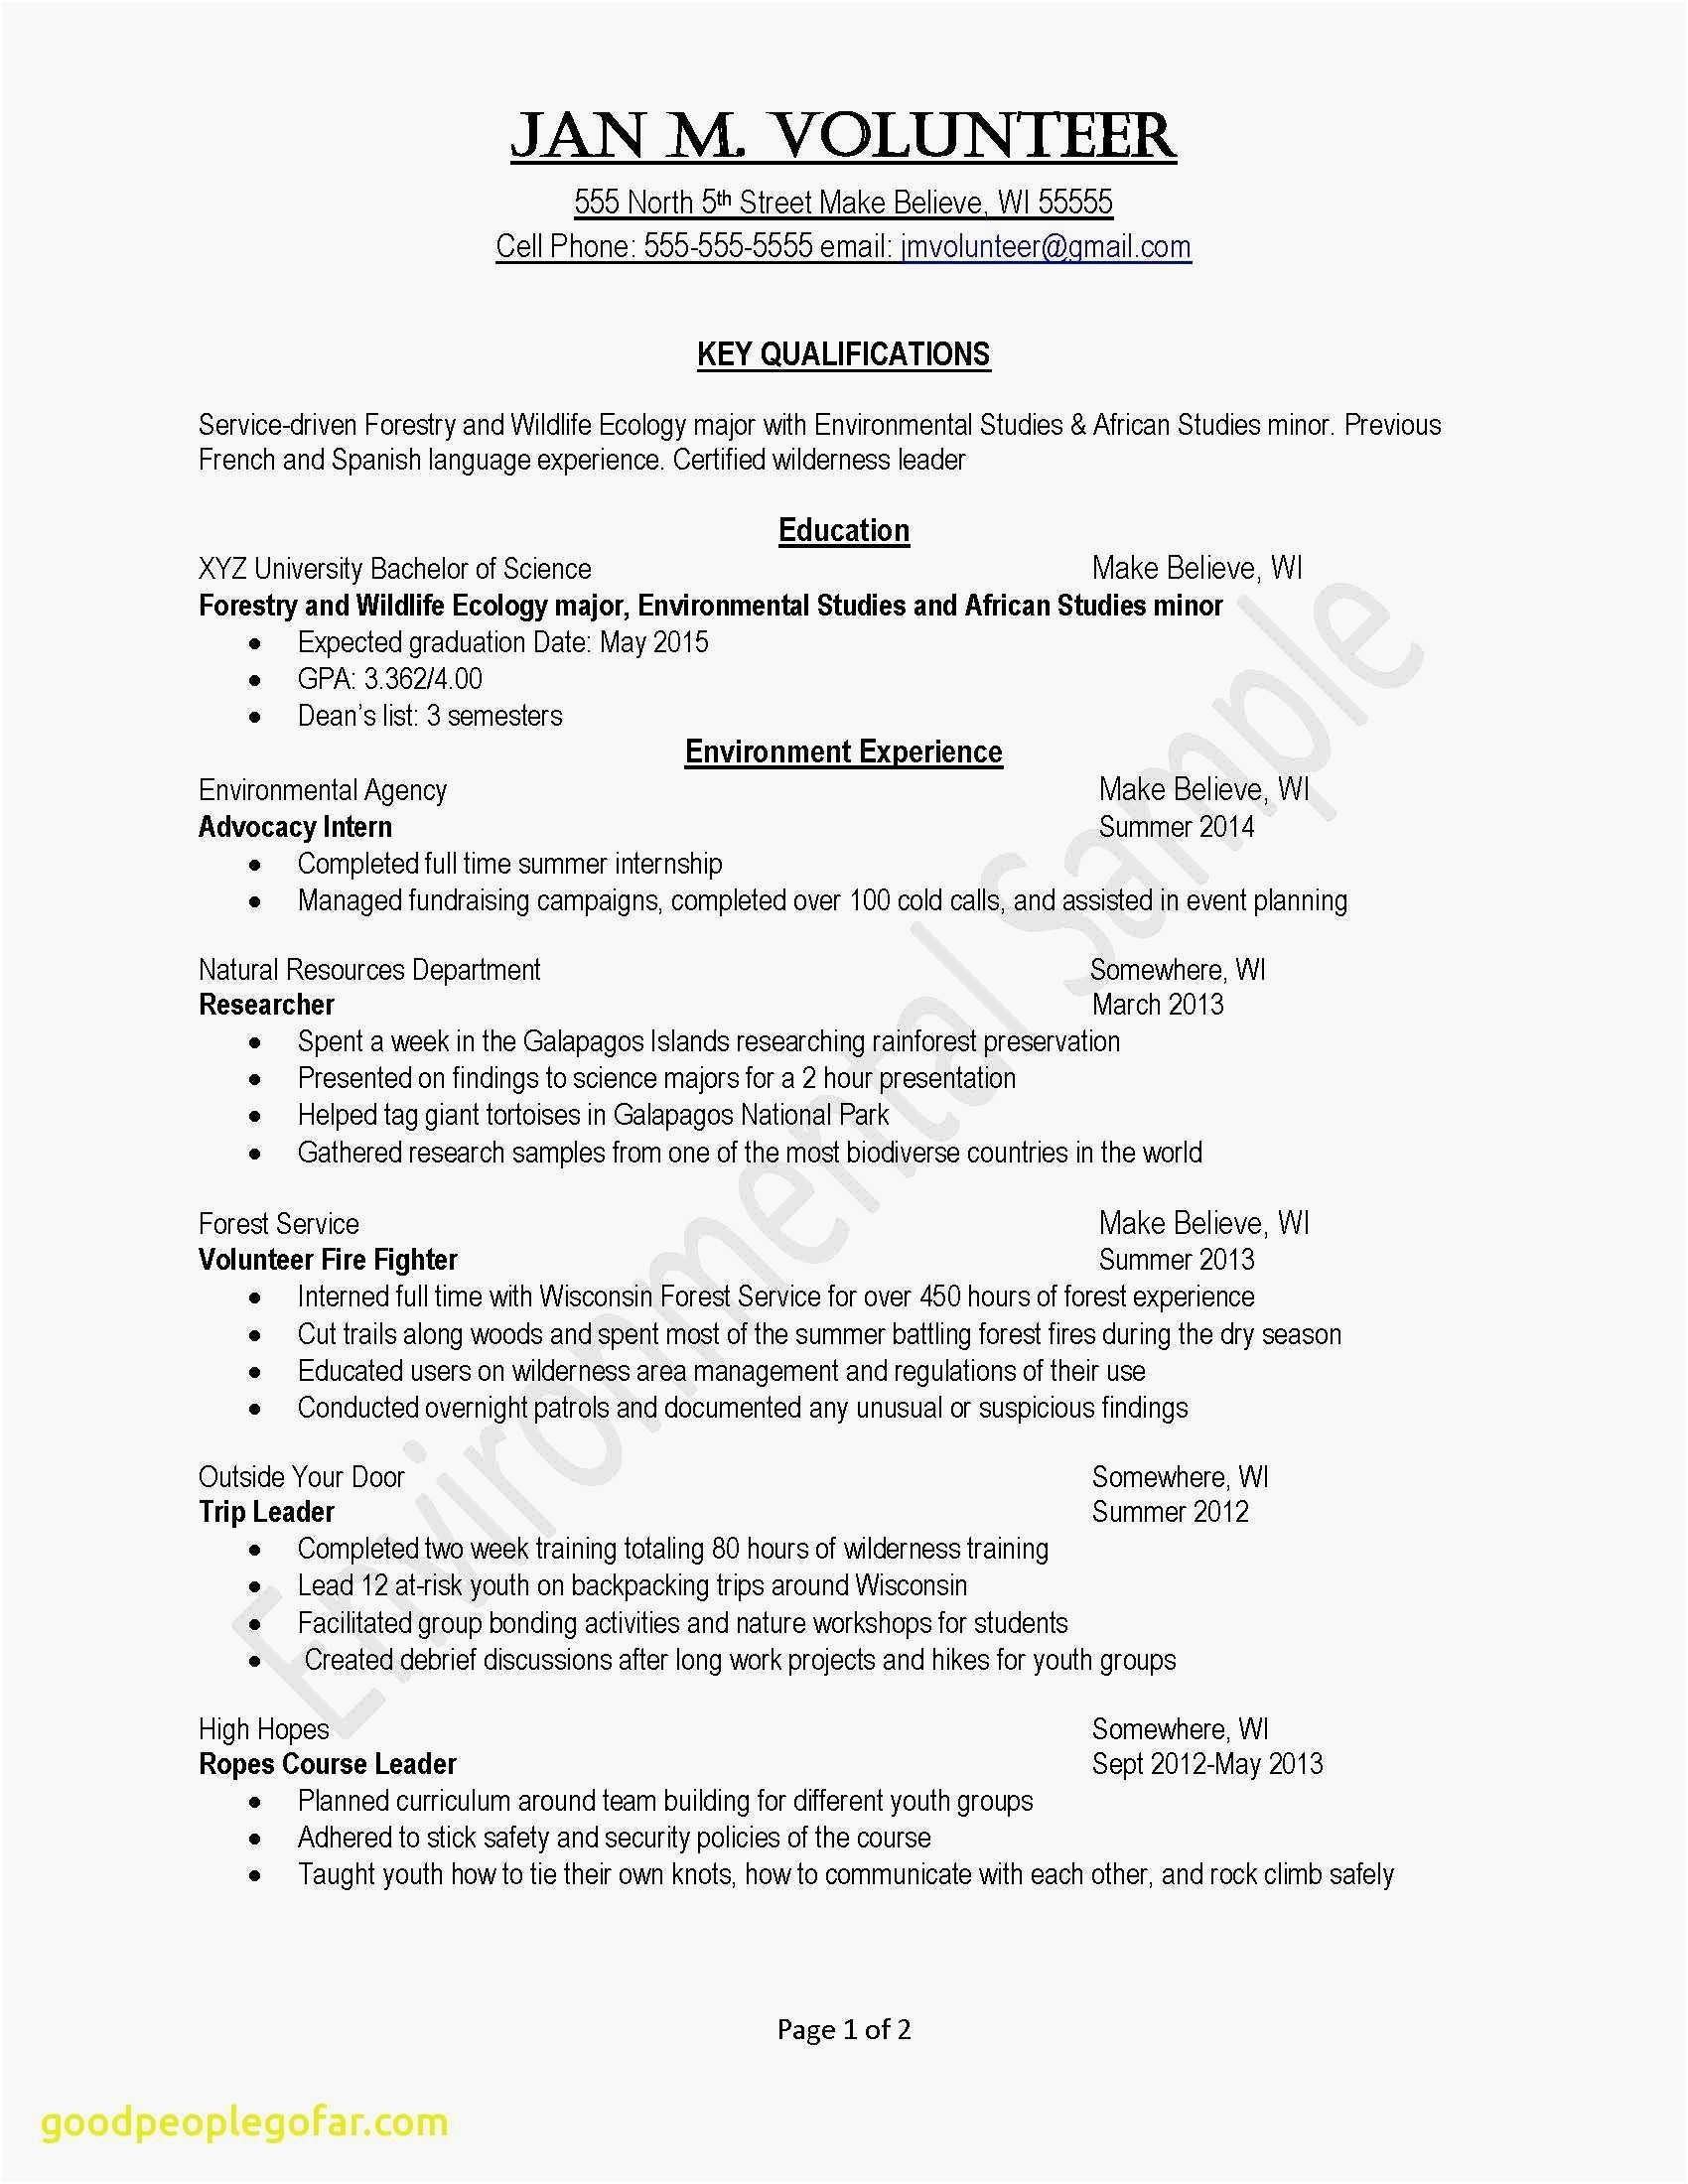 How to Create A Cover Letter Template - How to Make A Cover Letter for Resume New Beautiful Examples Resumes